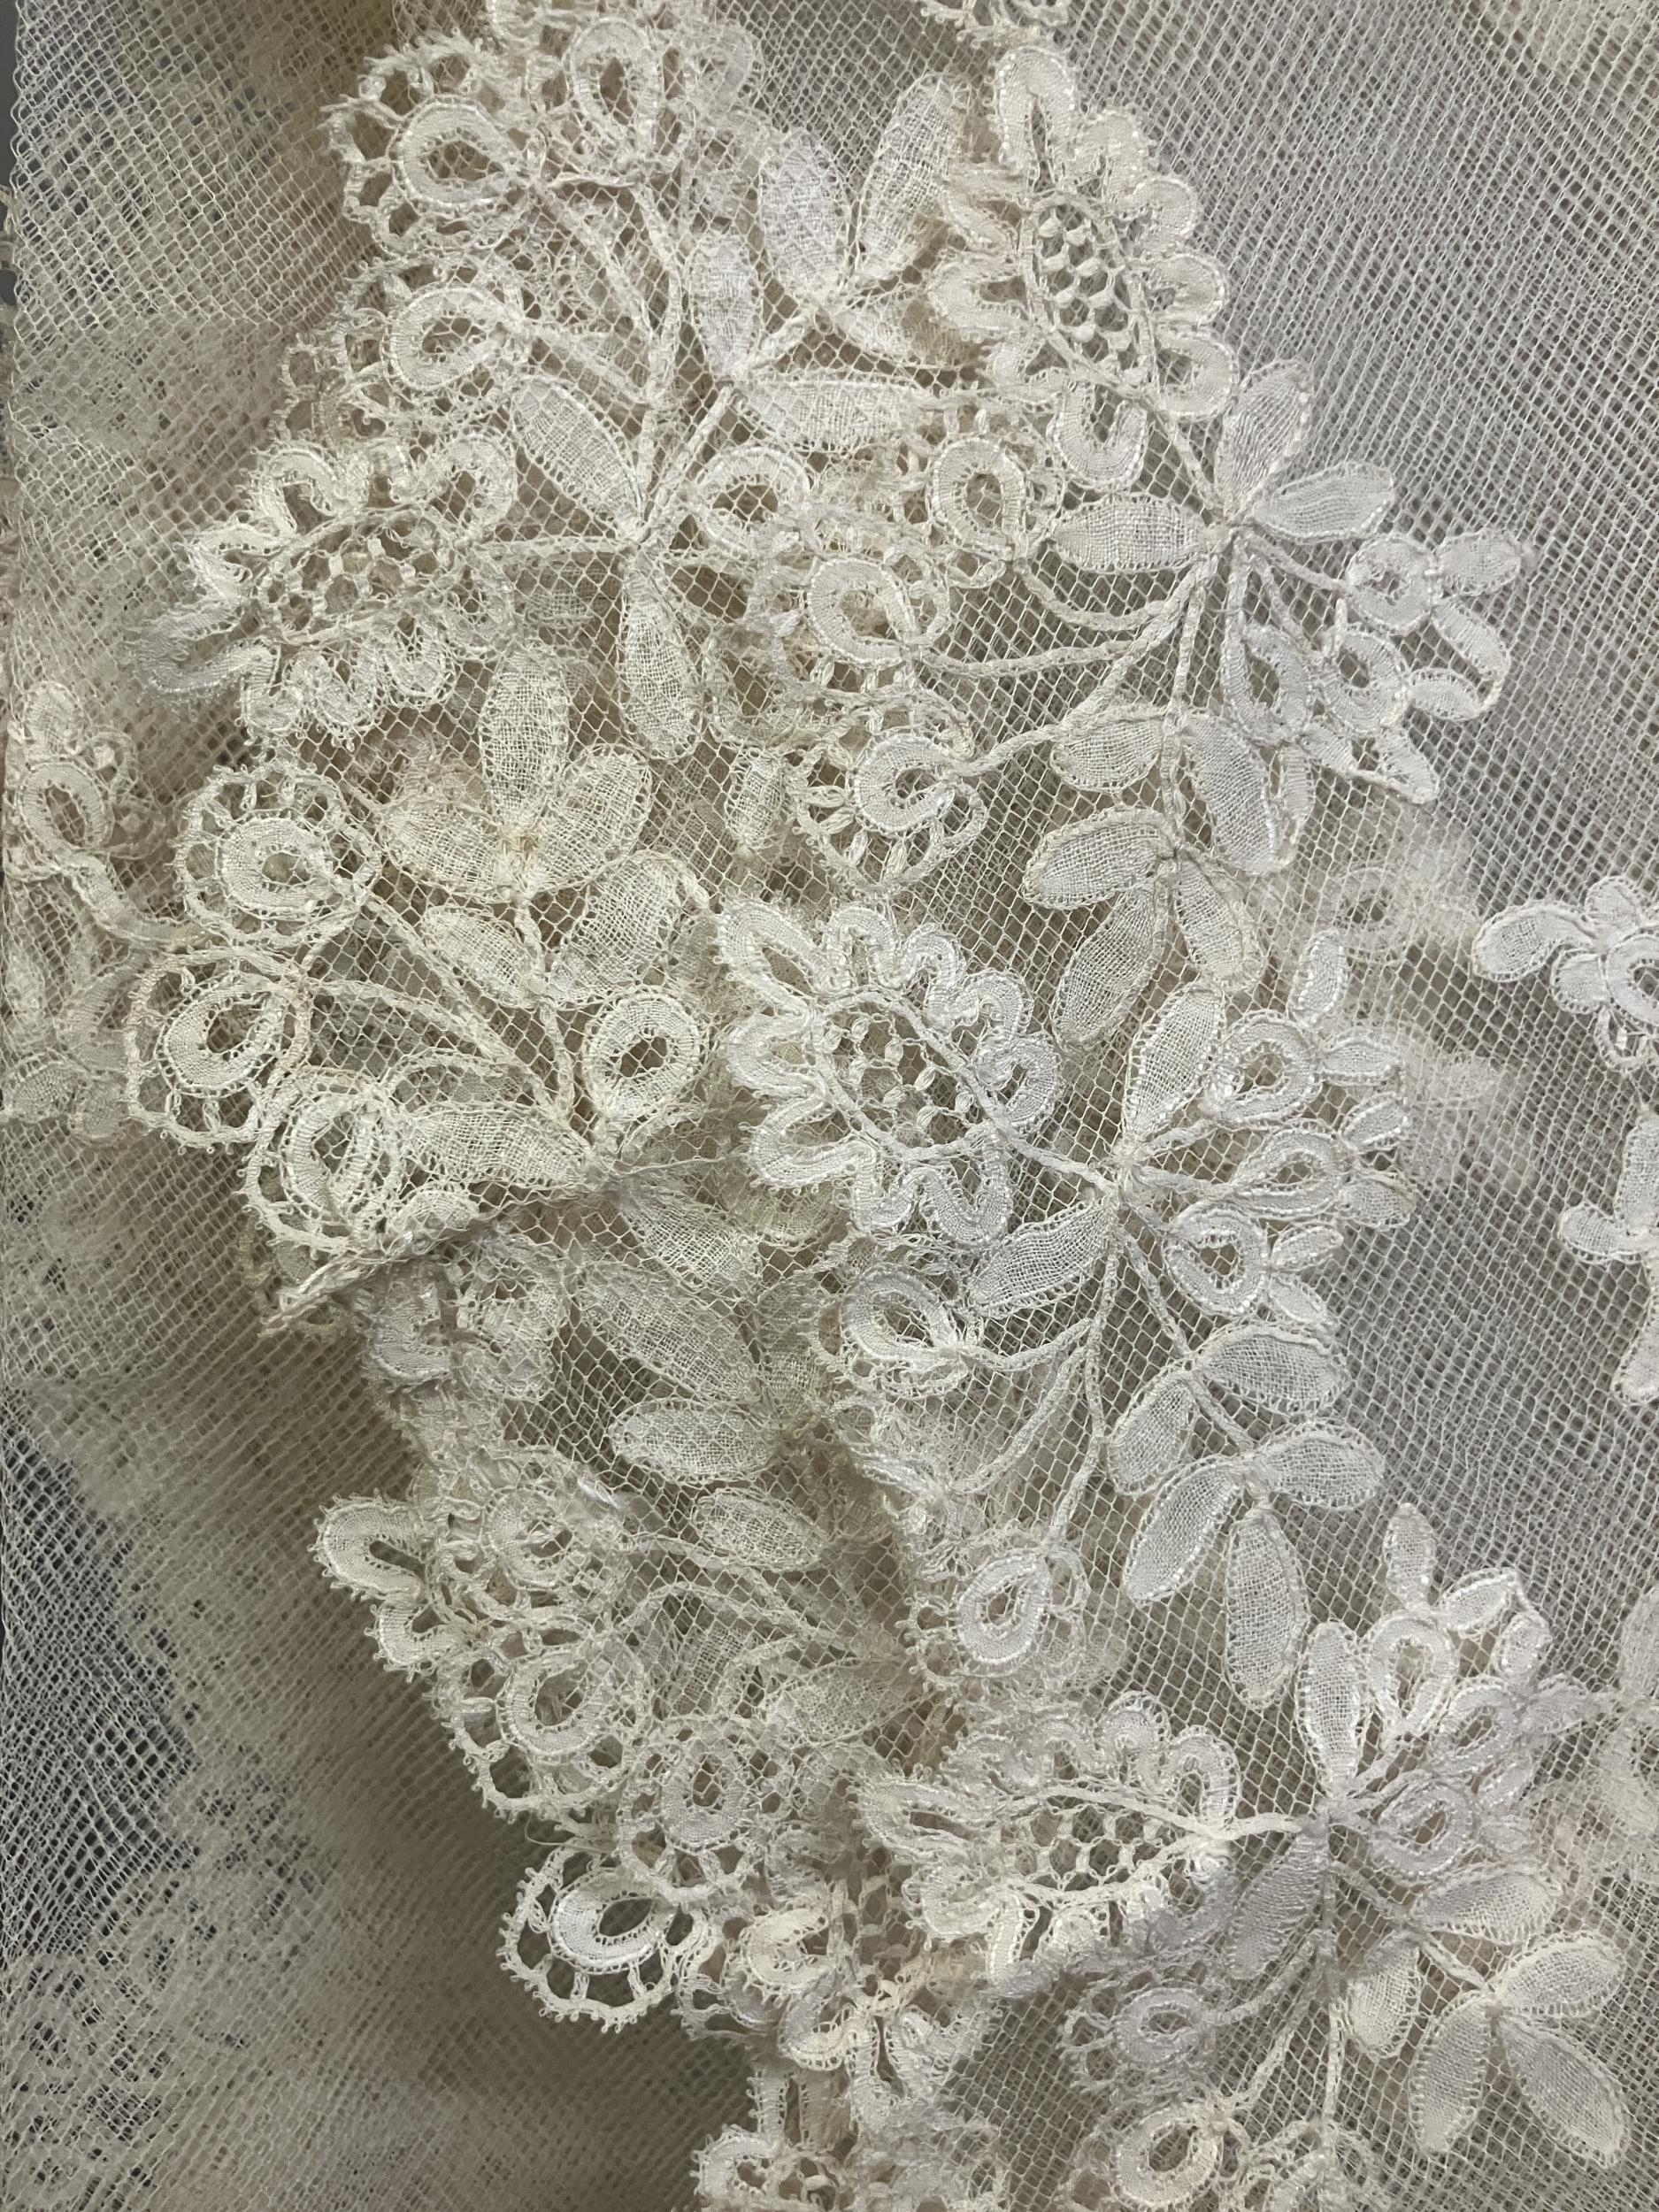 Antique Lace: a good Honiton appliqué wedding veil, with scalloped border, and large floral sprays - Image 2 of 7